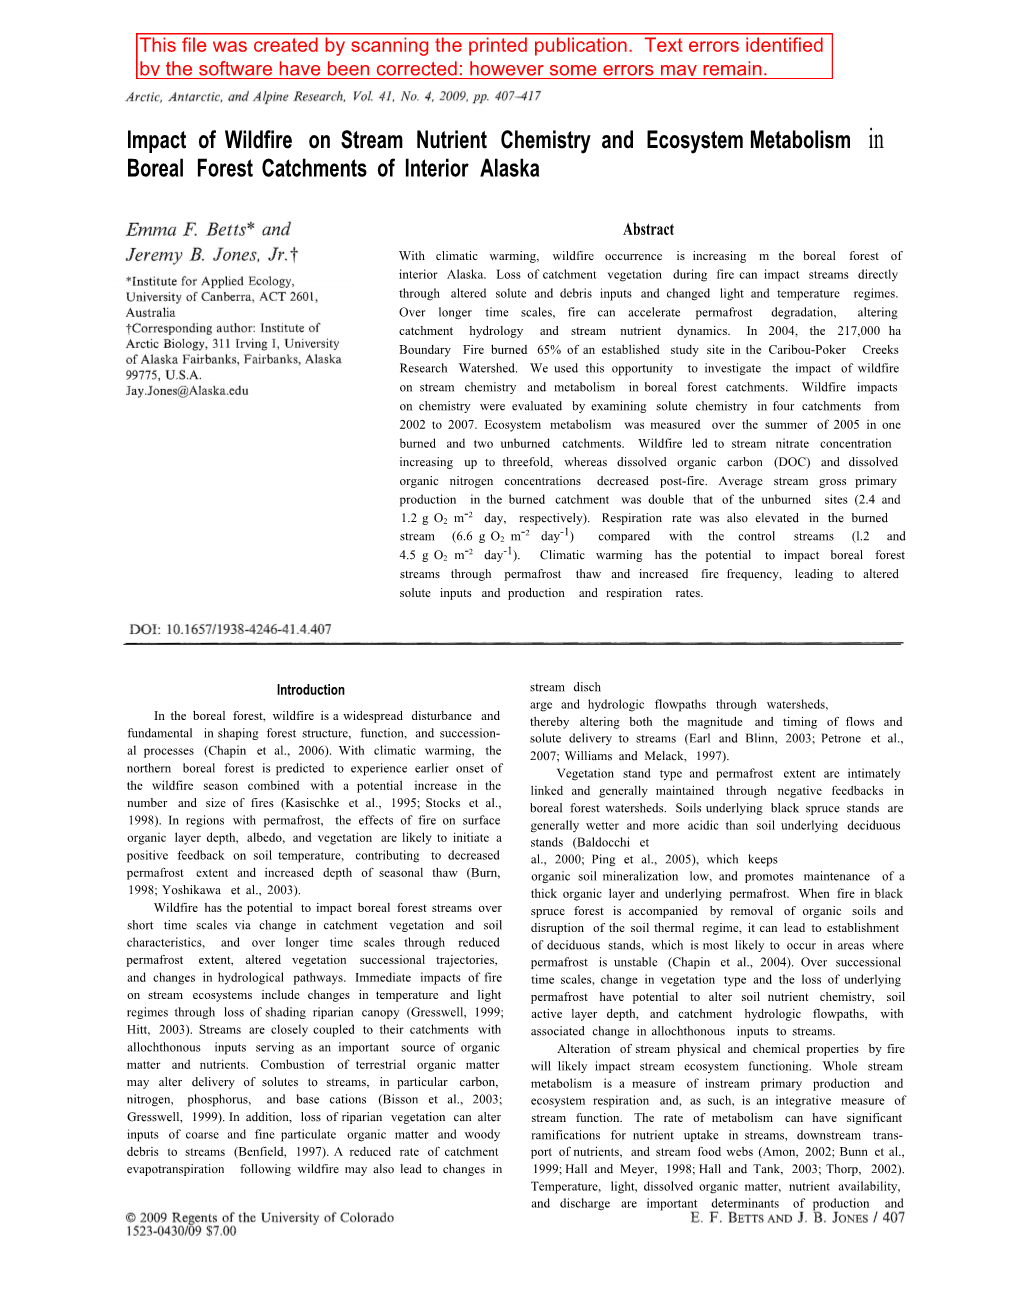 Impact of Wildfire on Stream Nutrient Chemistry and Ecosystem Metabolism in Boreal Forest Catchments of Interior Alaska